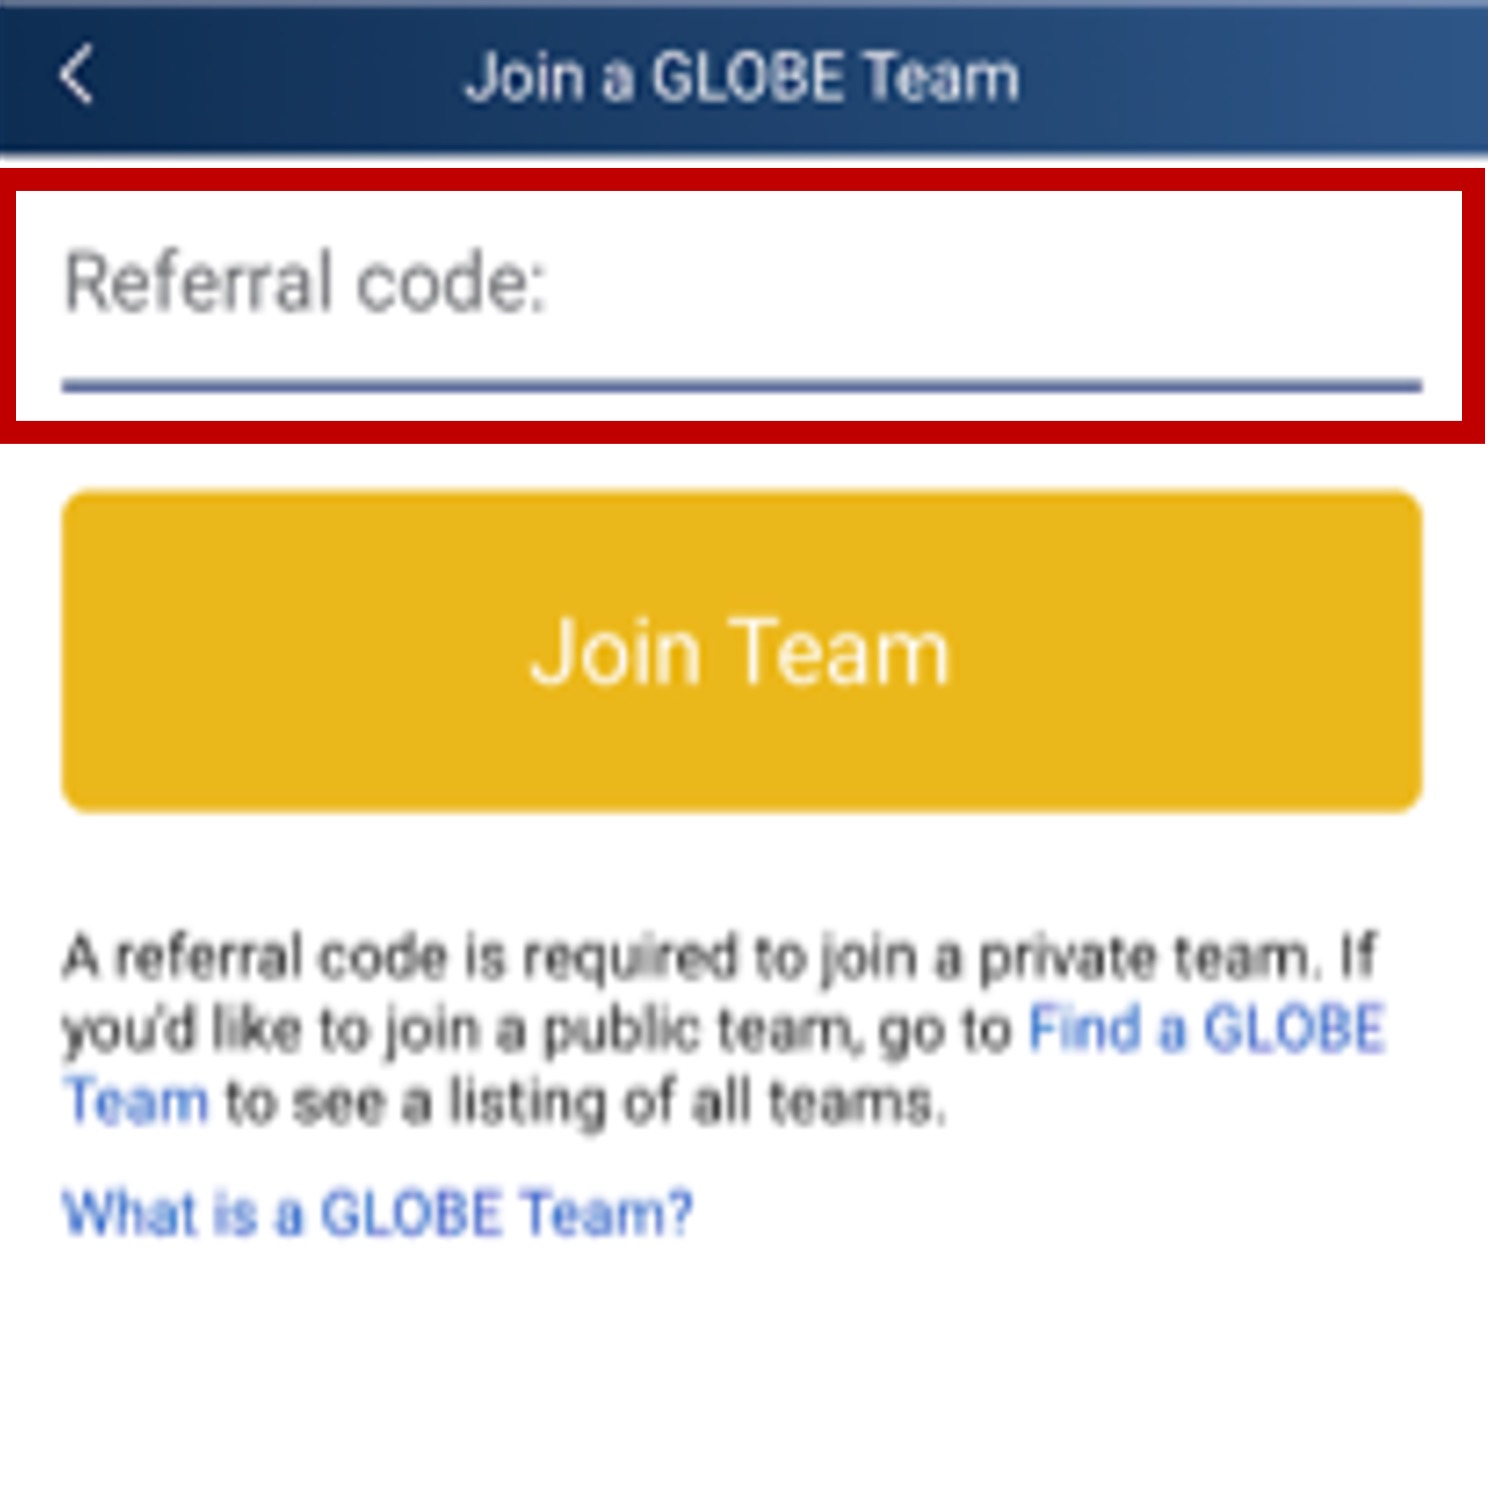 Image of the "Join a GLOBE Team" page in the GLOBE Observer app.